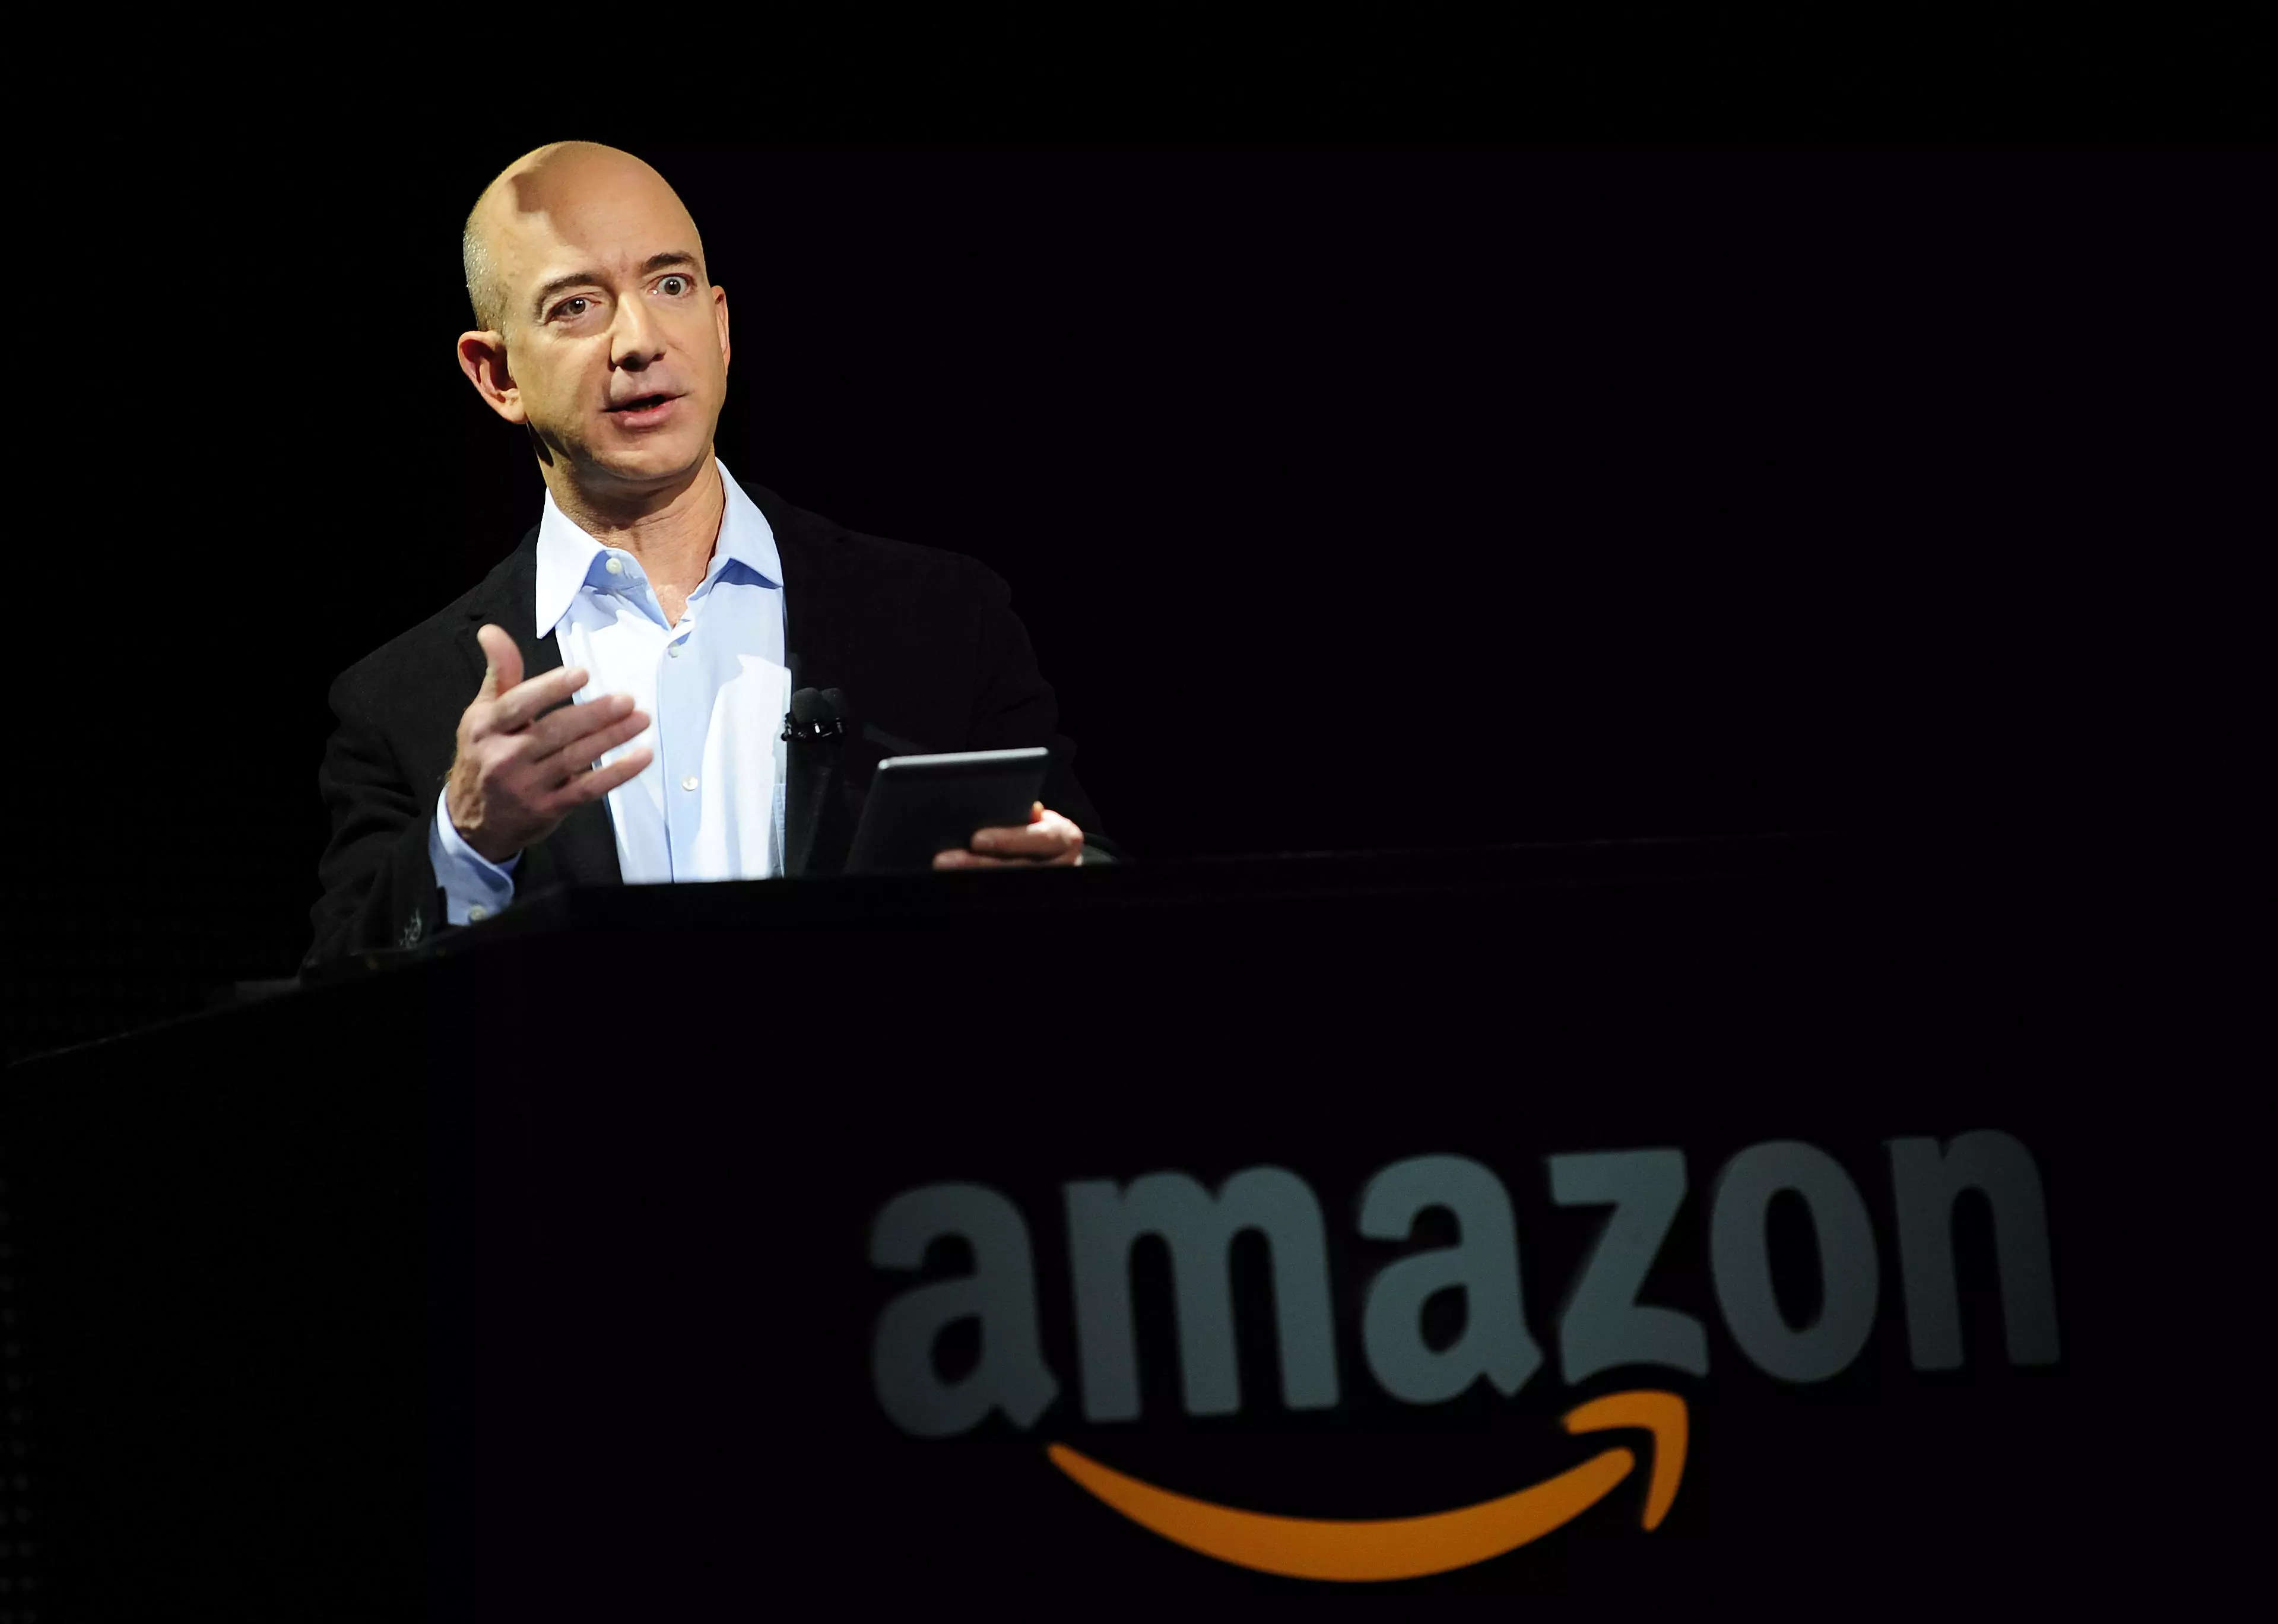 Jeff Bezos in a suit on top of an Amazon logo